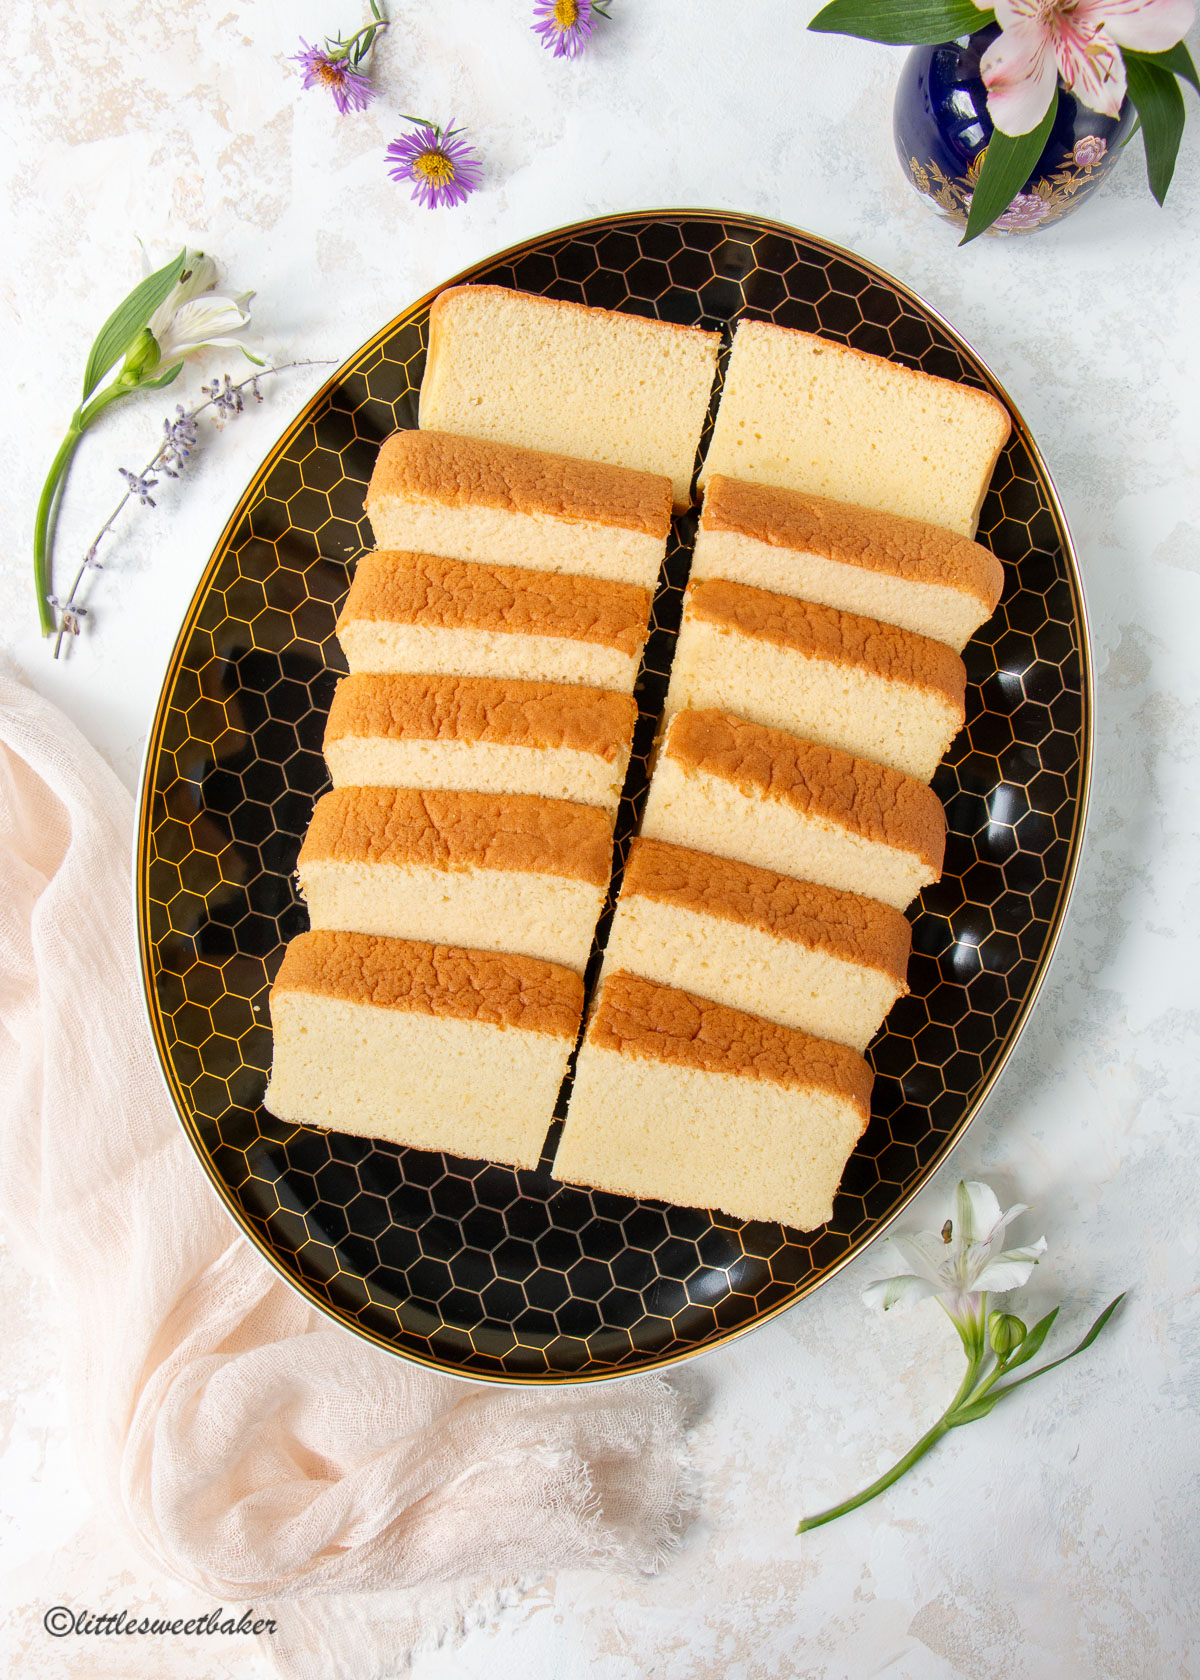 12 slices of castella cake on a black and gold oval plate